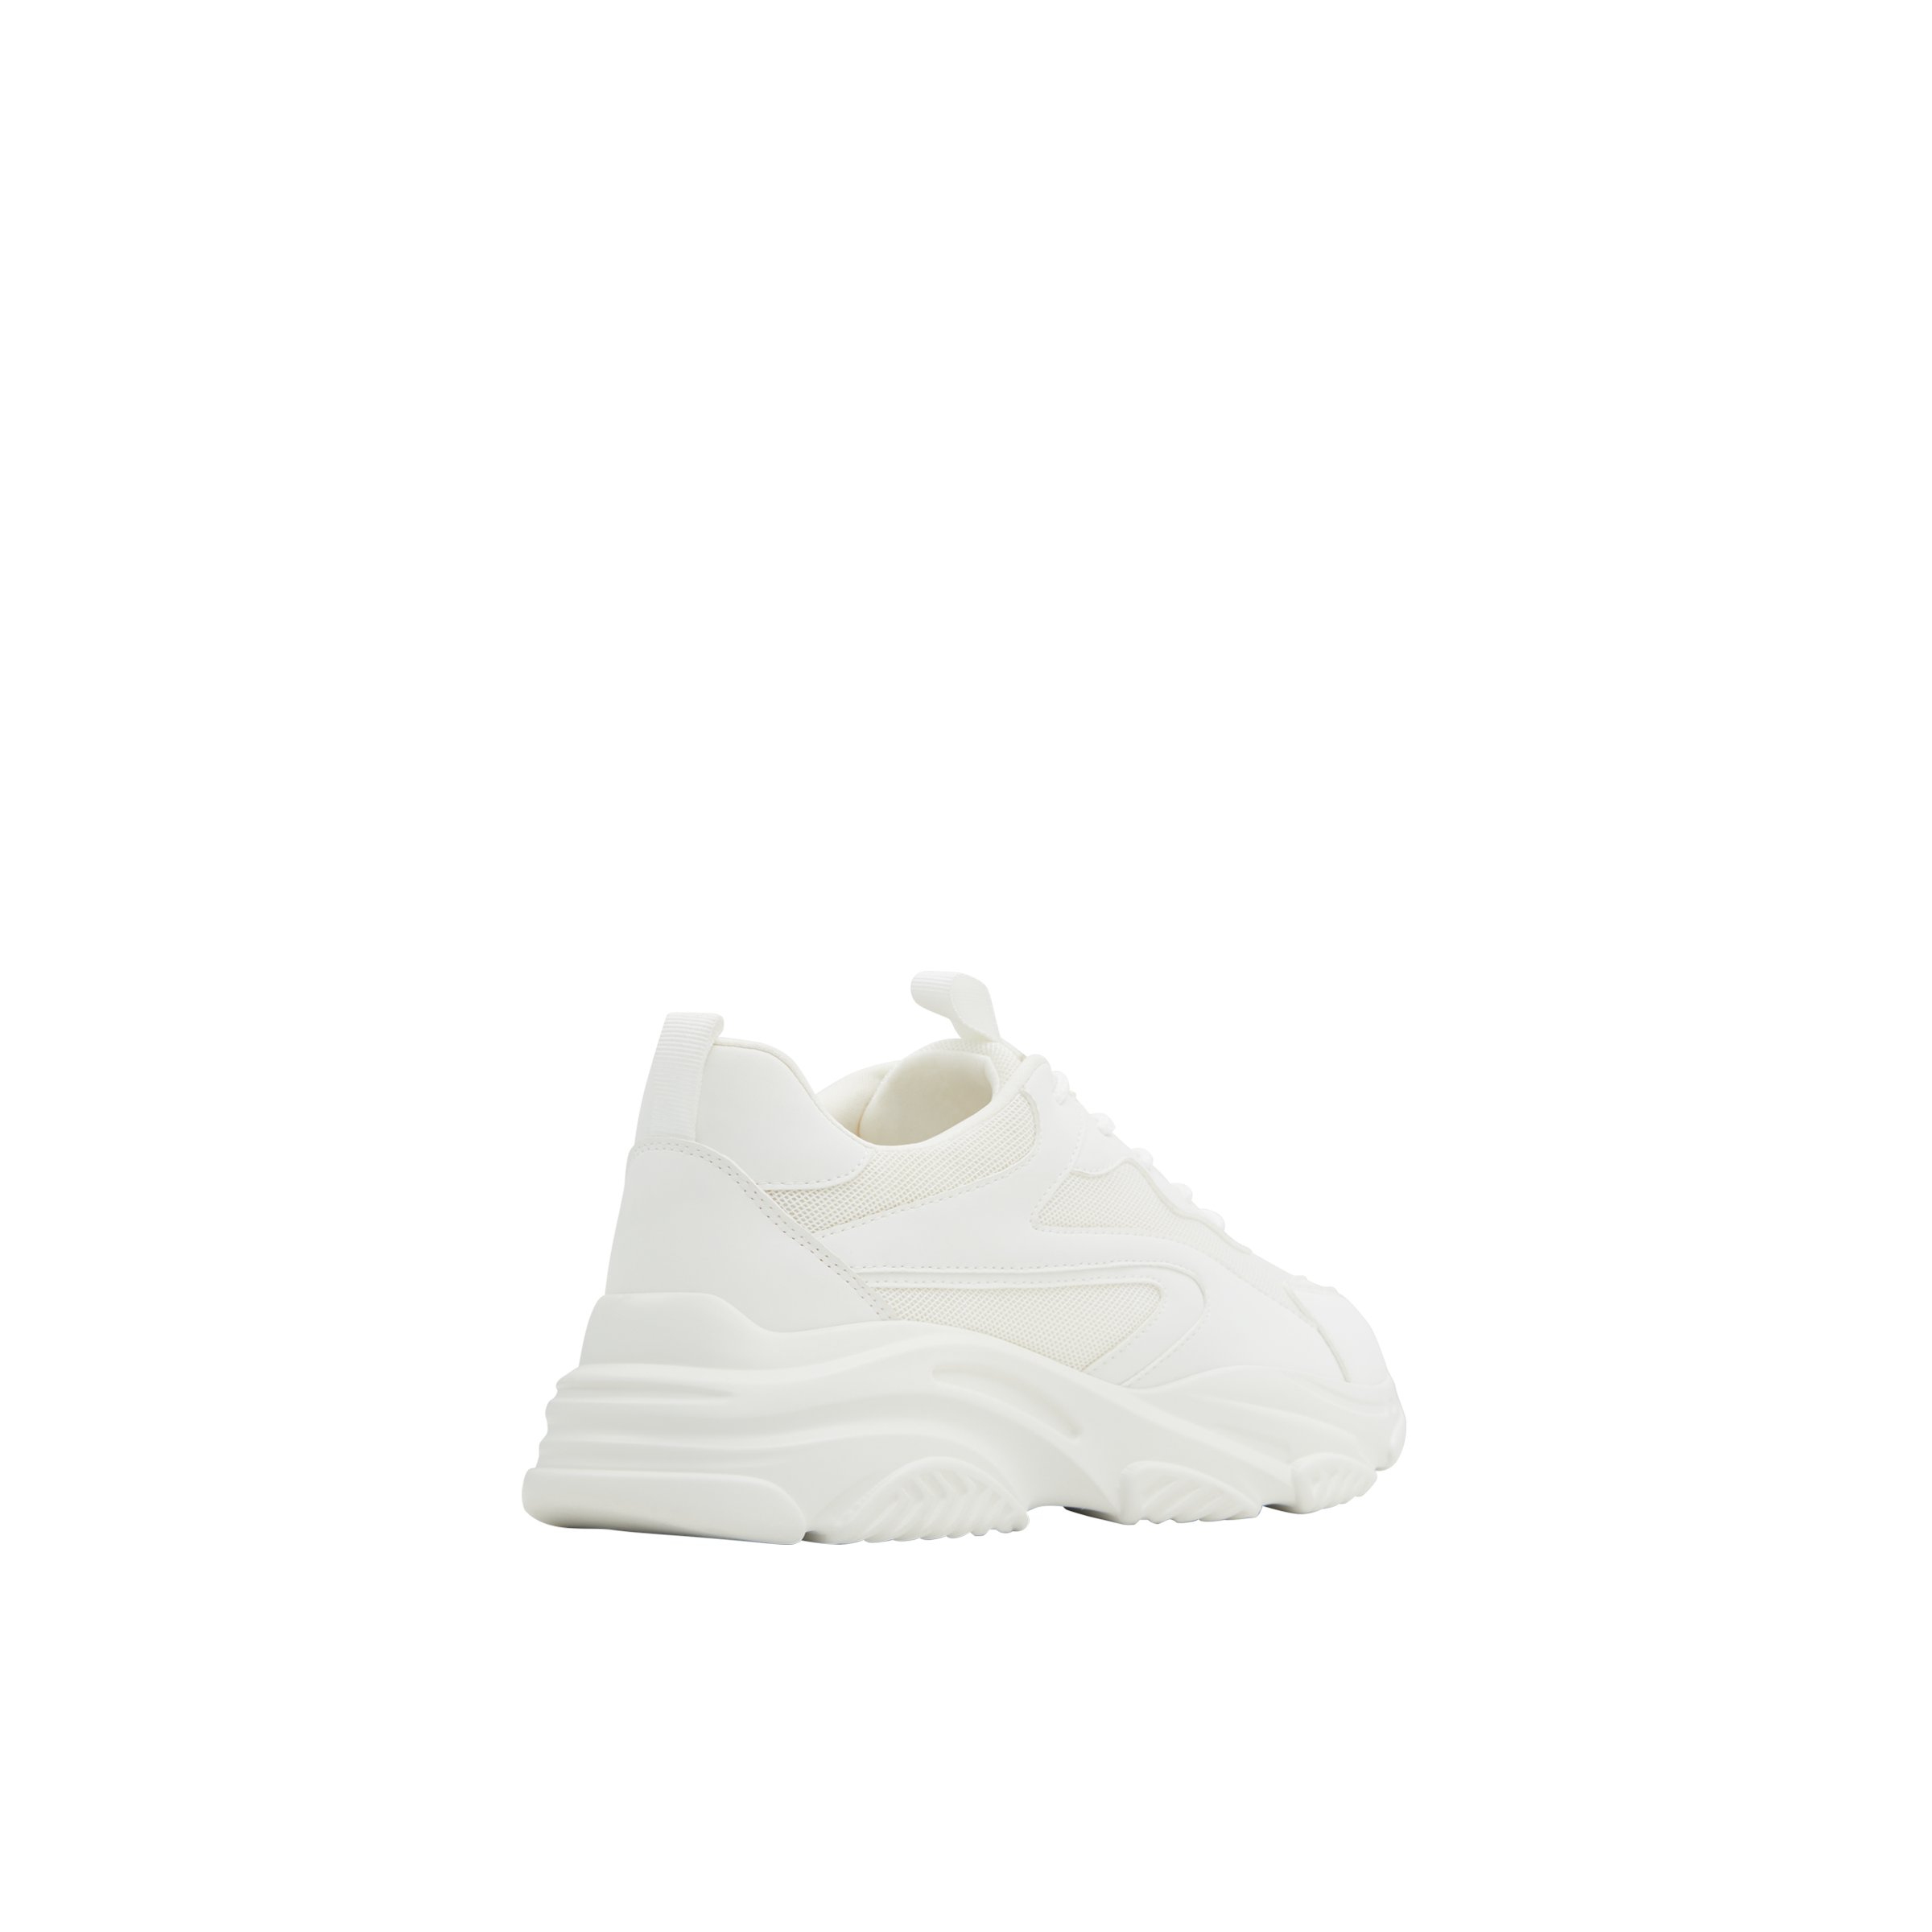 Refreshh_h White Men's Athleisure Shoes | Call It Spring Canada